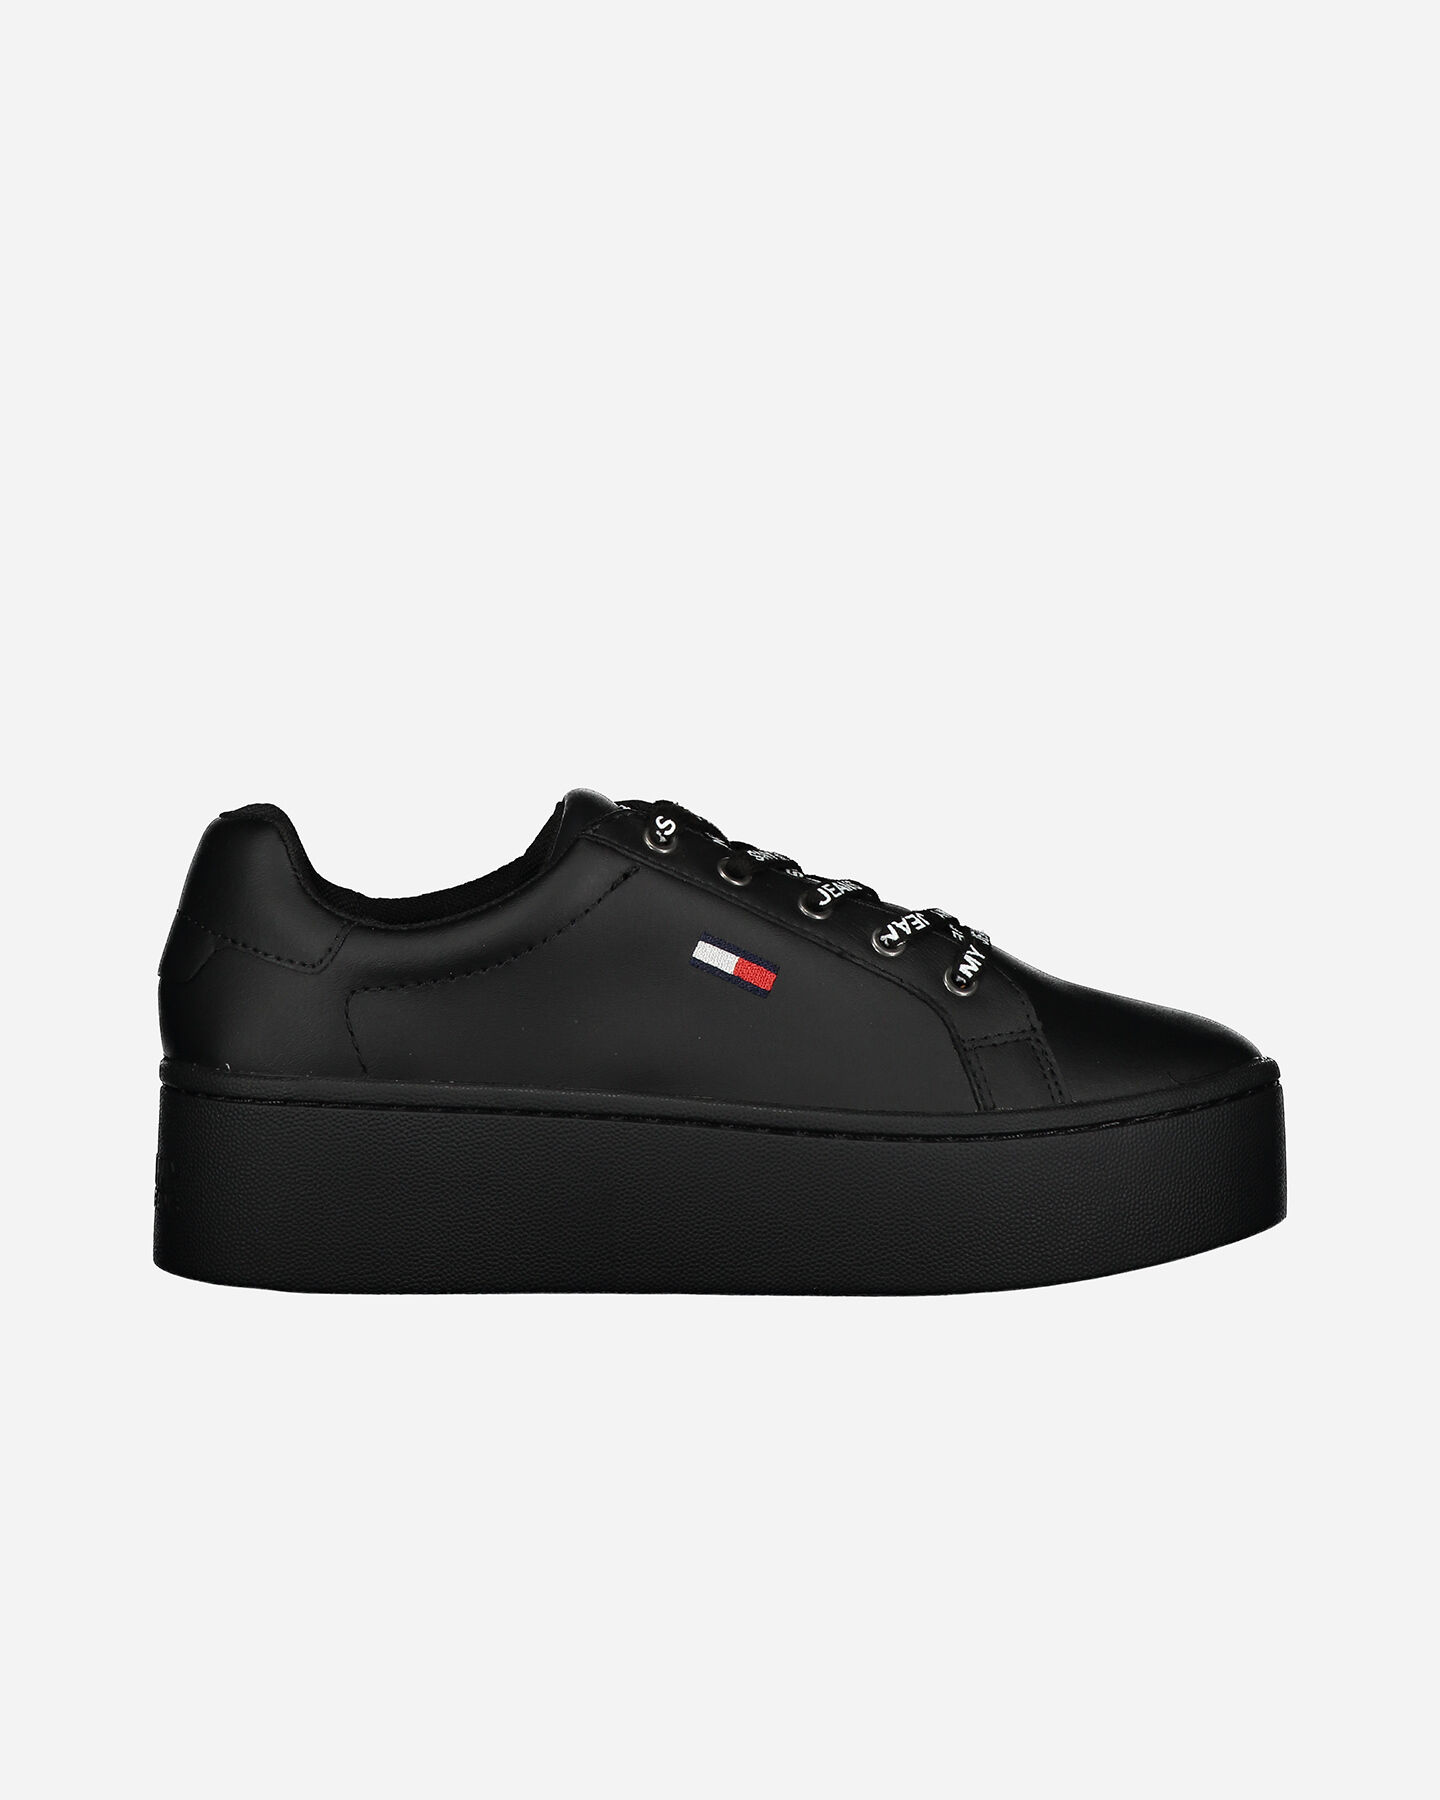  Scarpe sneakers TOMMY HILFIGER ROXIE ICONIC LEATHER FLATFORM W S4082111|BDS|36 scatto 0